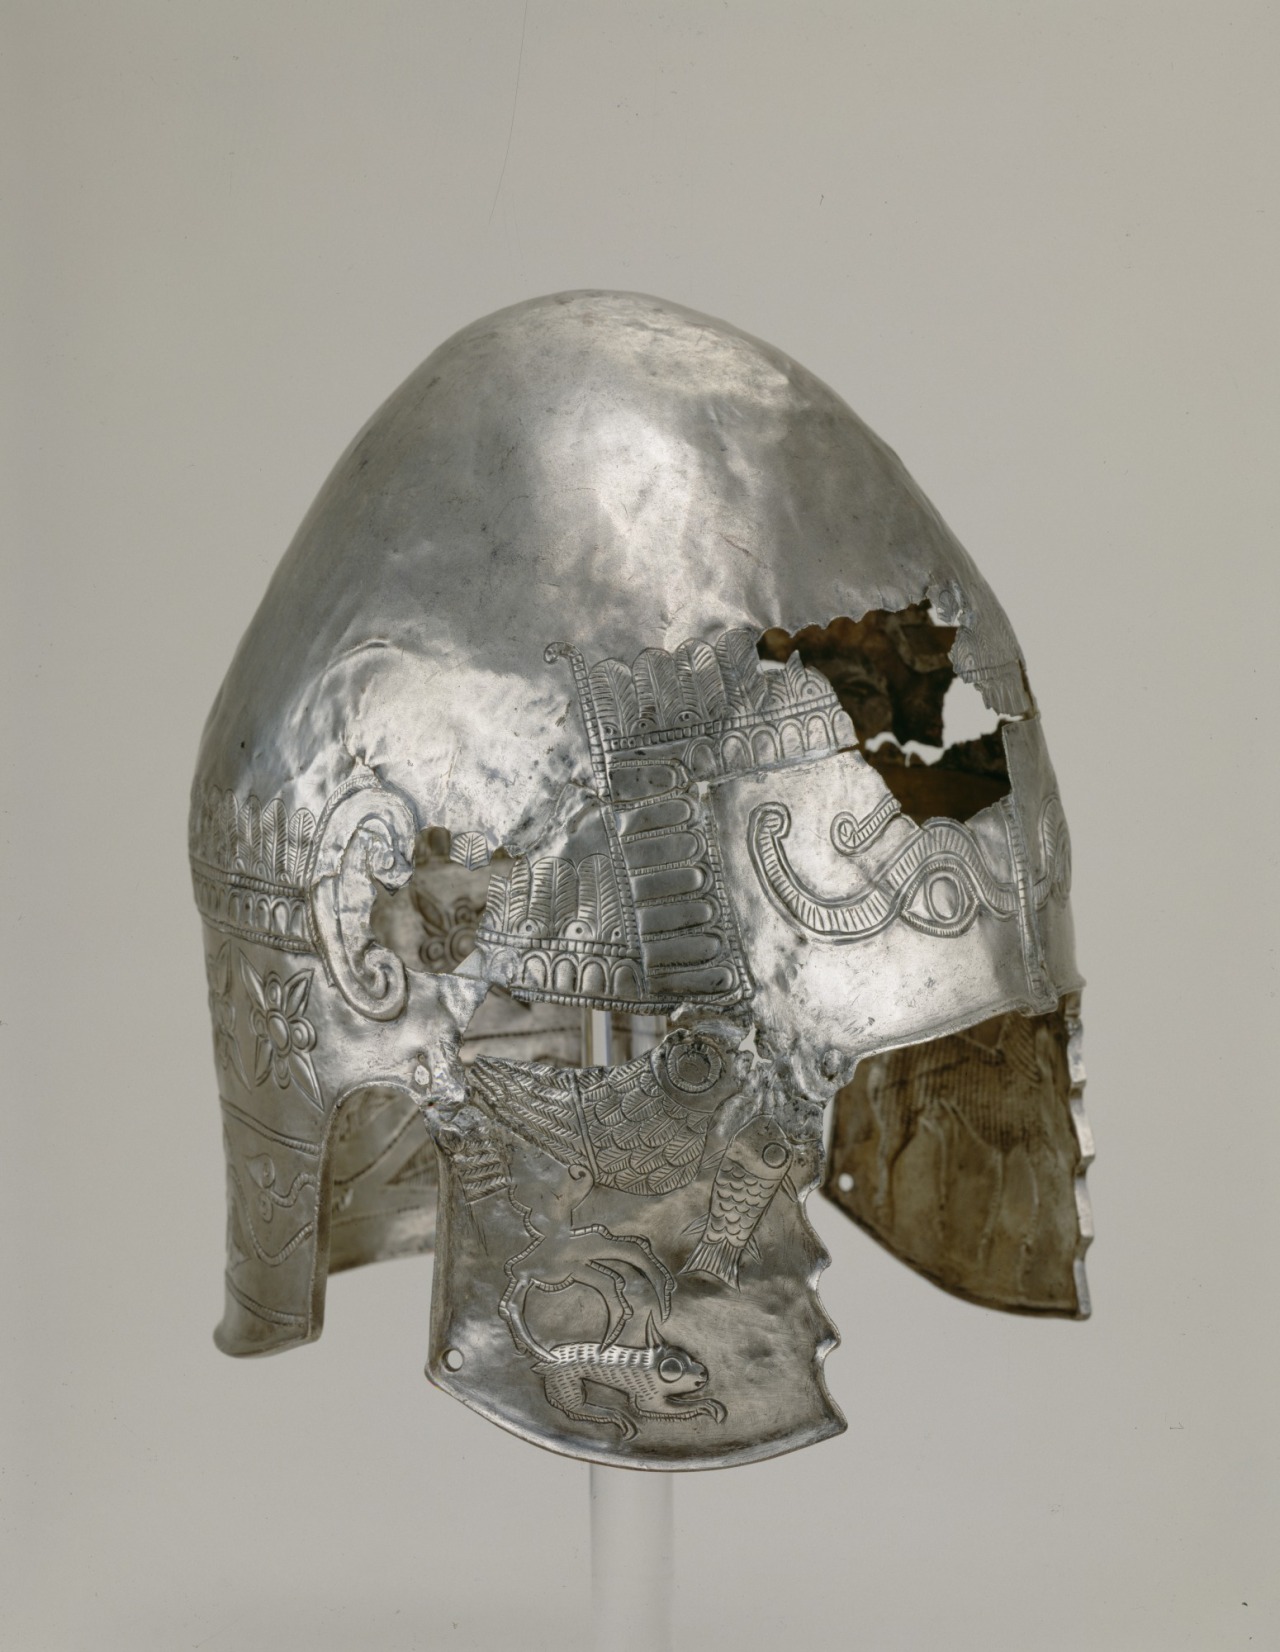 An intricately engraved Thracian silver ceremonial helmet, ca. 4th century BC. Housed at the Detroit Institute of Arts.jpg